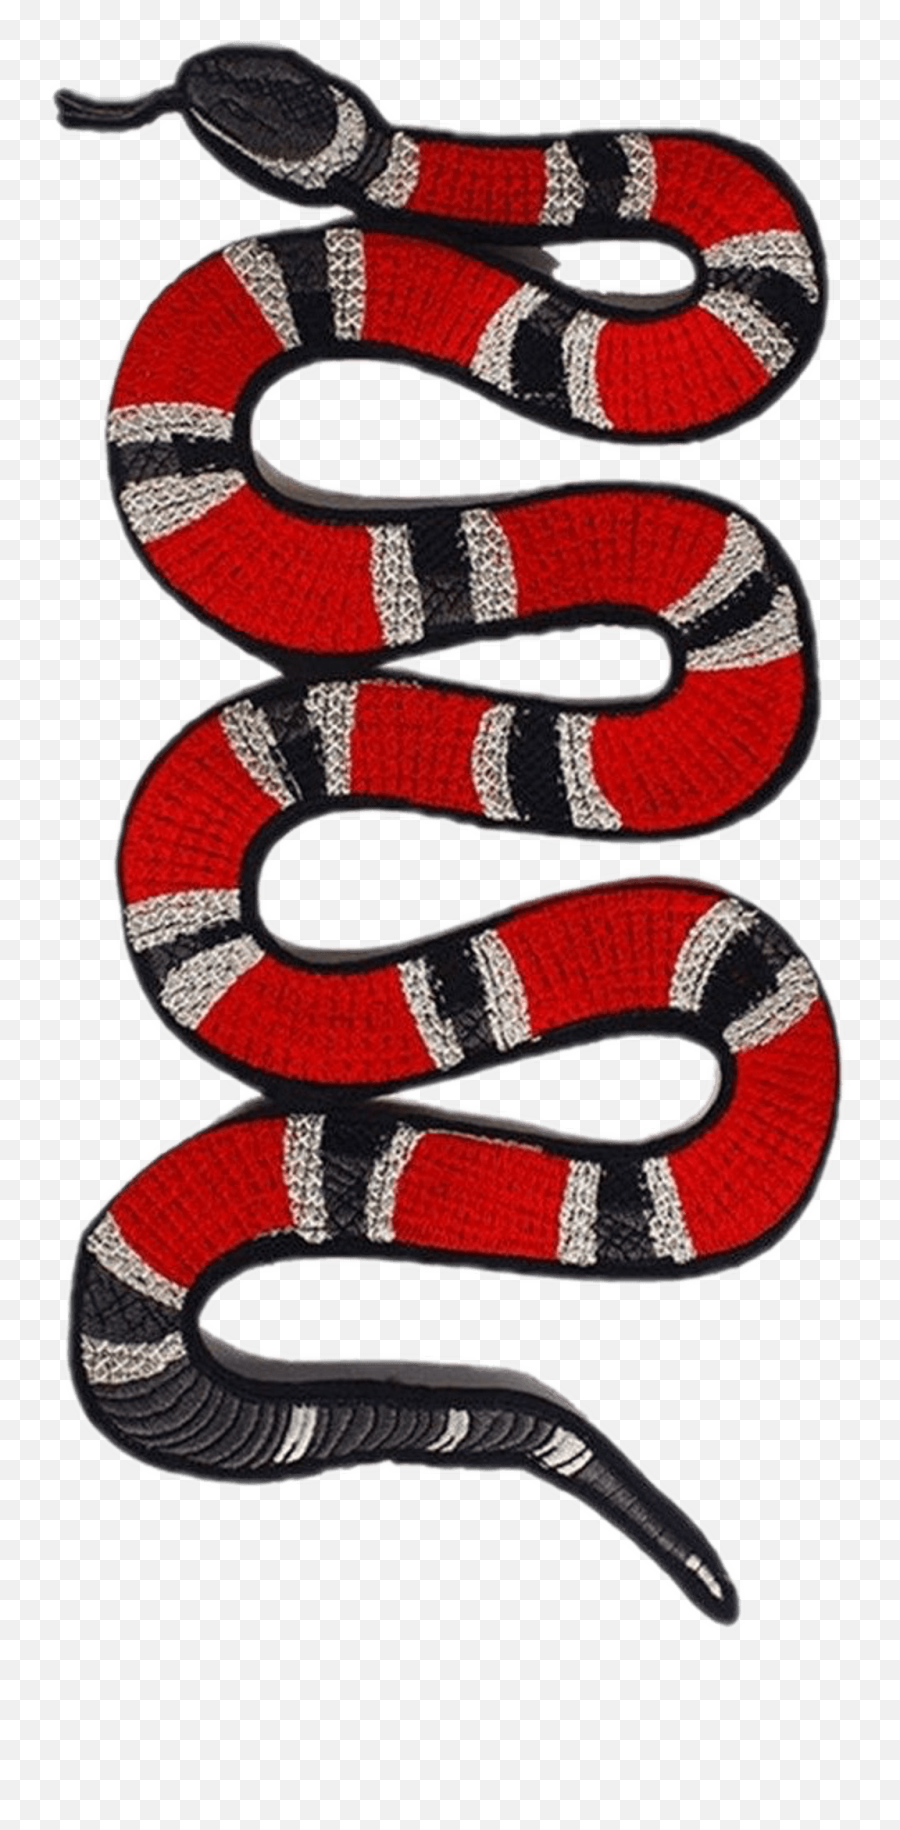 Gucci Guccisnake Red Lit - Sticker By K33m Stickers Light Gucci Snake Transparent Background Png,Snake Transparent Background